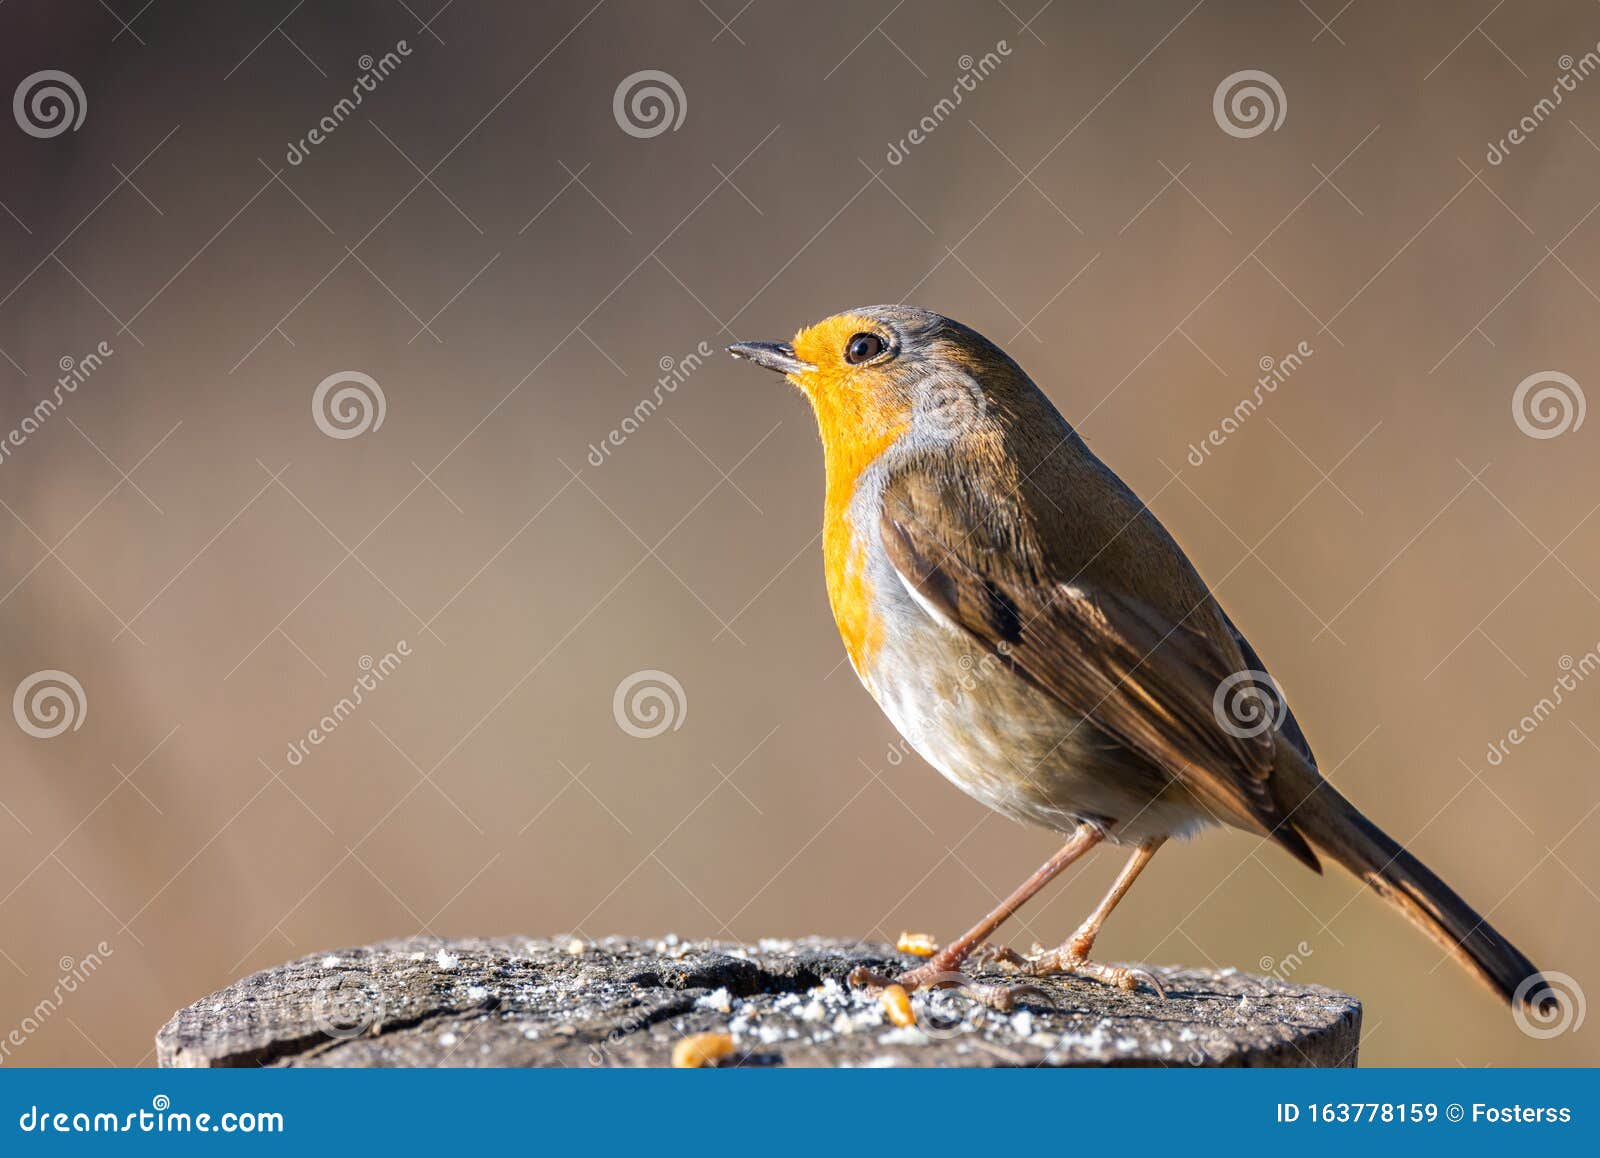 erithacus rubecula or petirrojo europeo with copy space for text